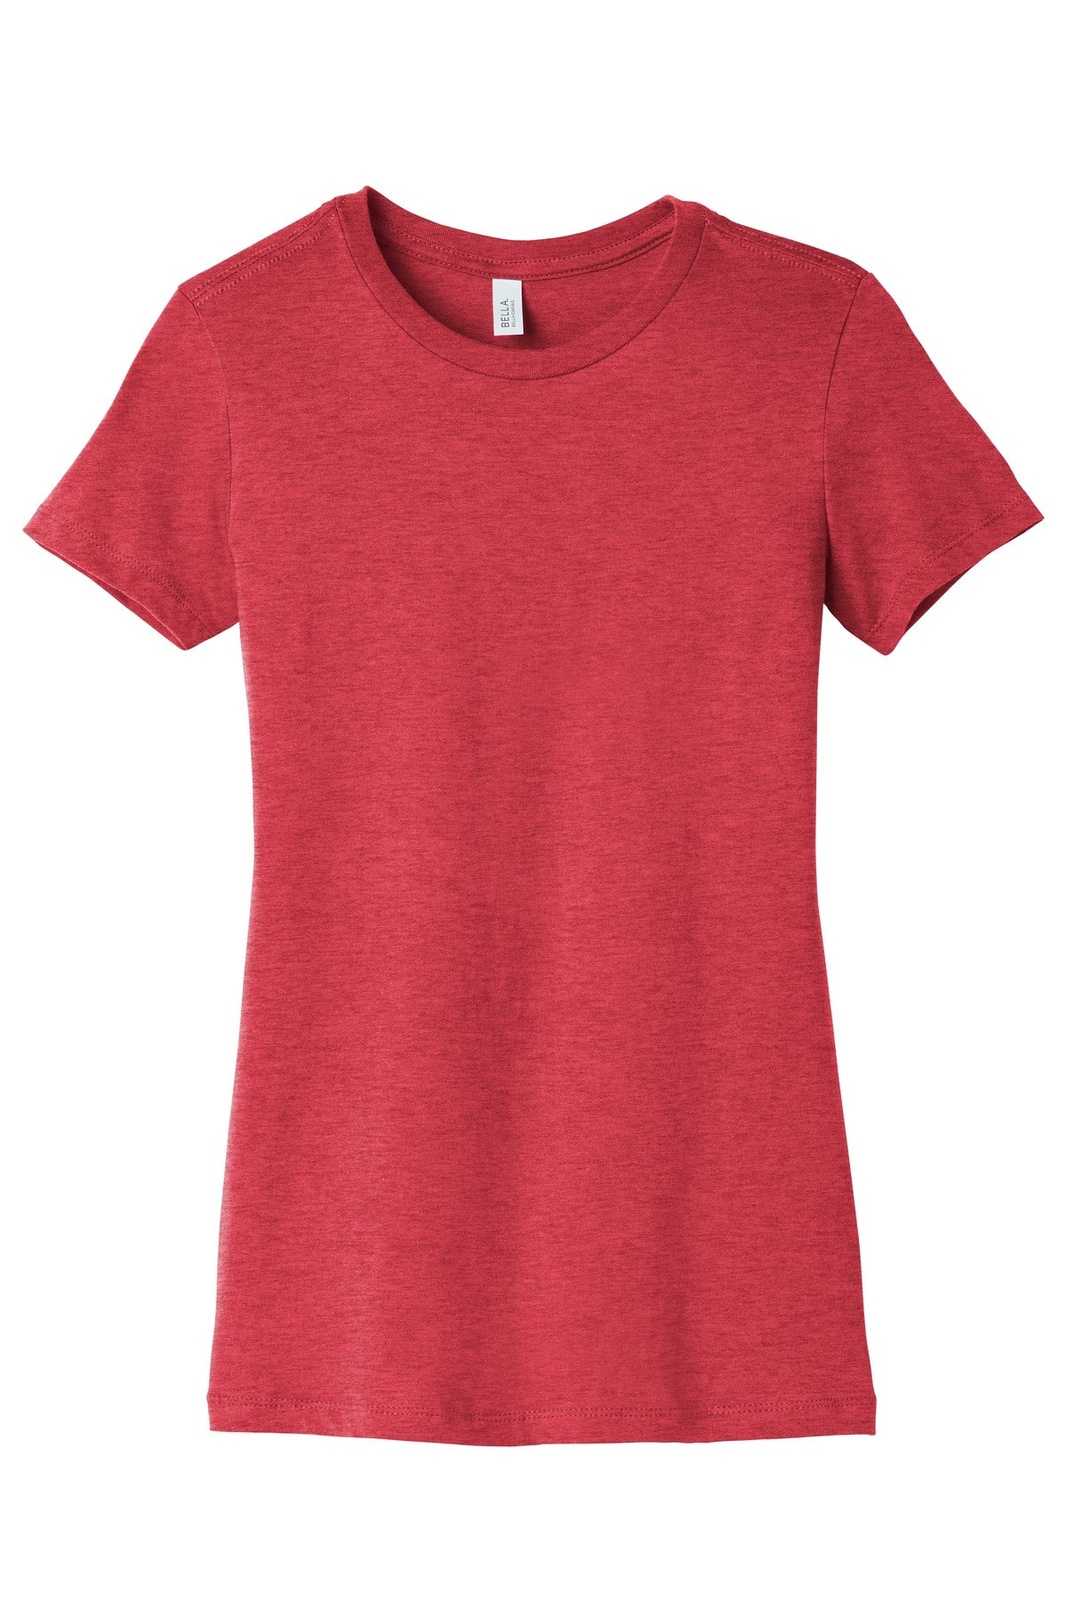 Bella + Canvas 6004 Women's The Favorite Tee - Heather Red - HIT a Double